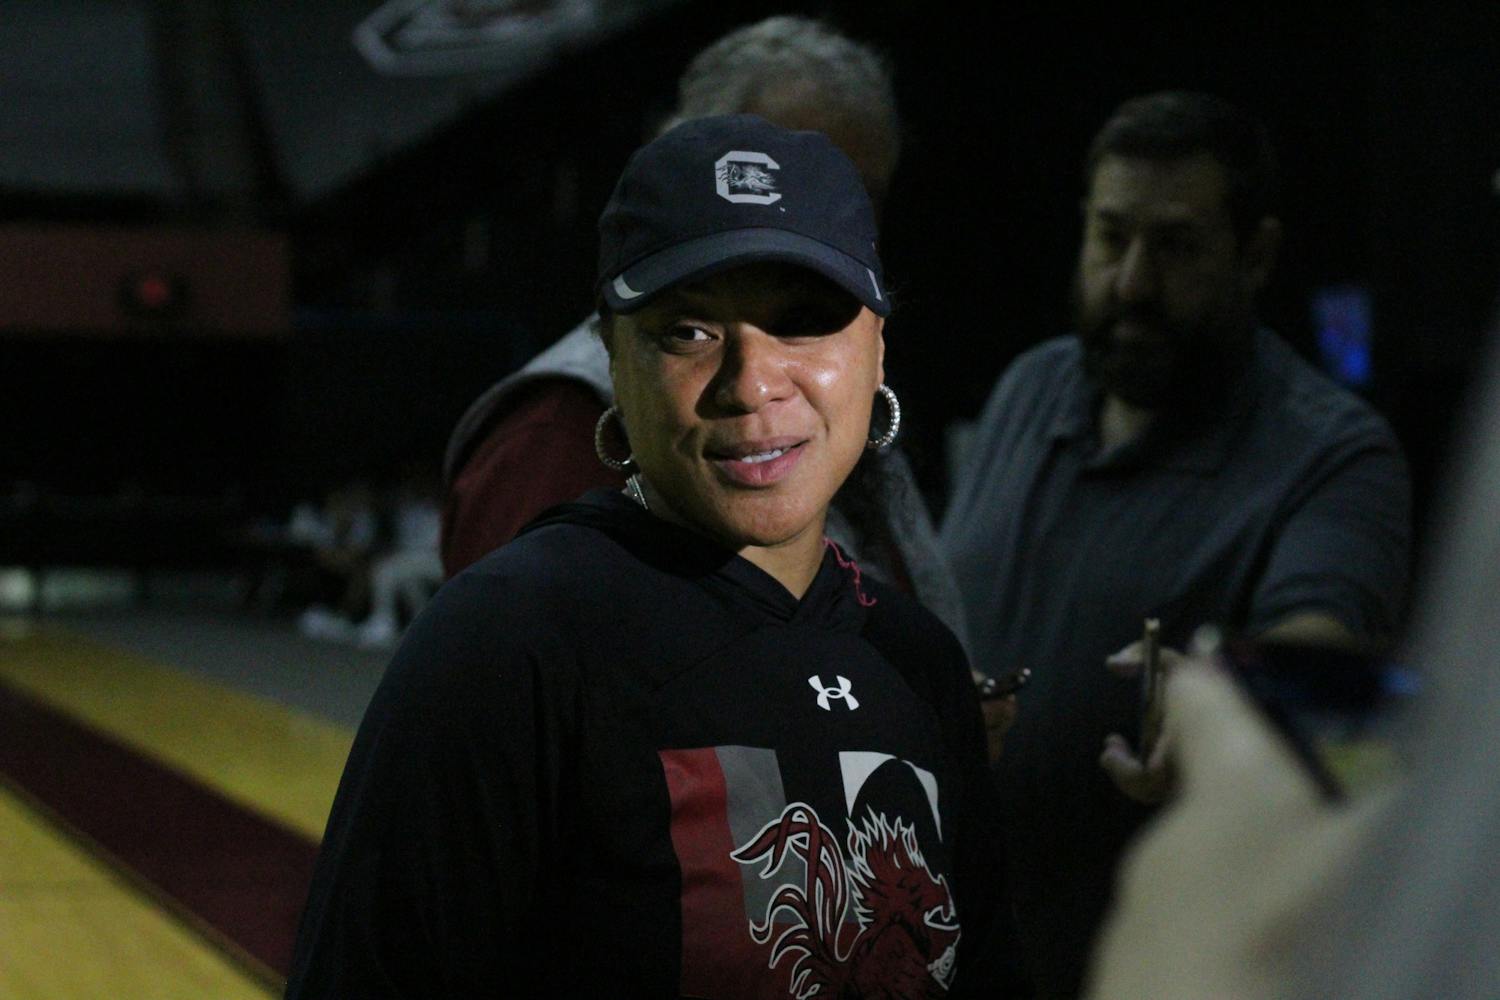 Dawn Staley, head coach of the South Carolina's women’s basketball team, talks with reporters after the first official practice of the season on Sept. 28, 2023. She said she is optimistic and confident in her team’s abilities to have a successful upcoming season.